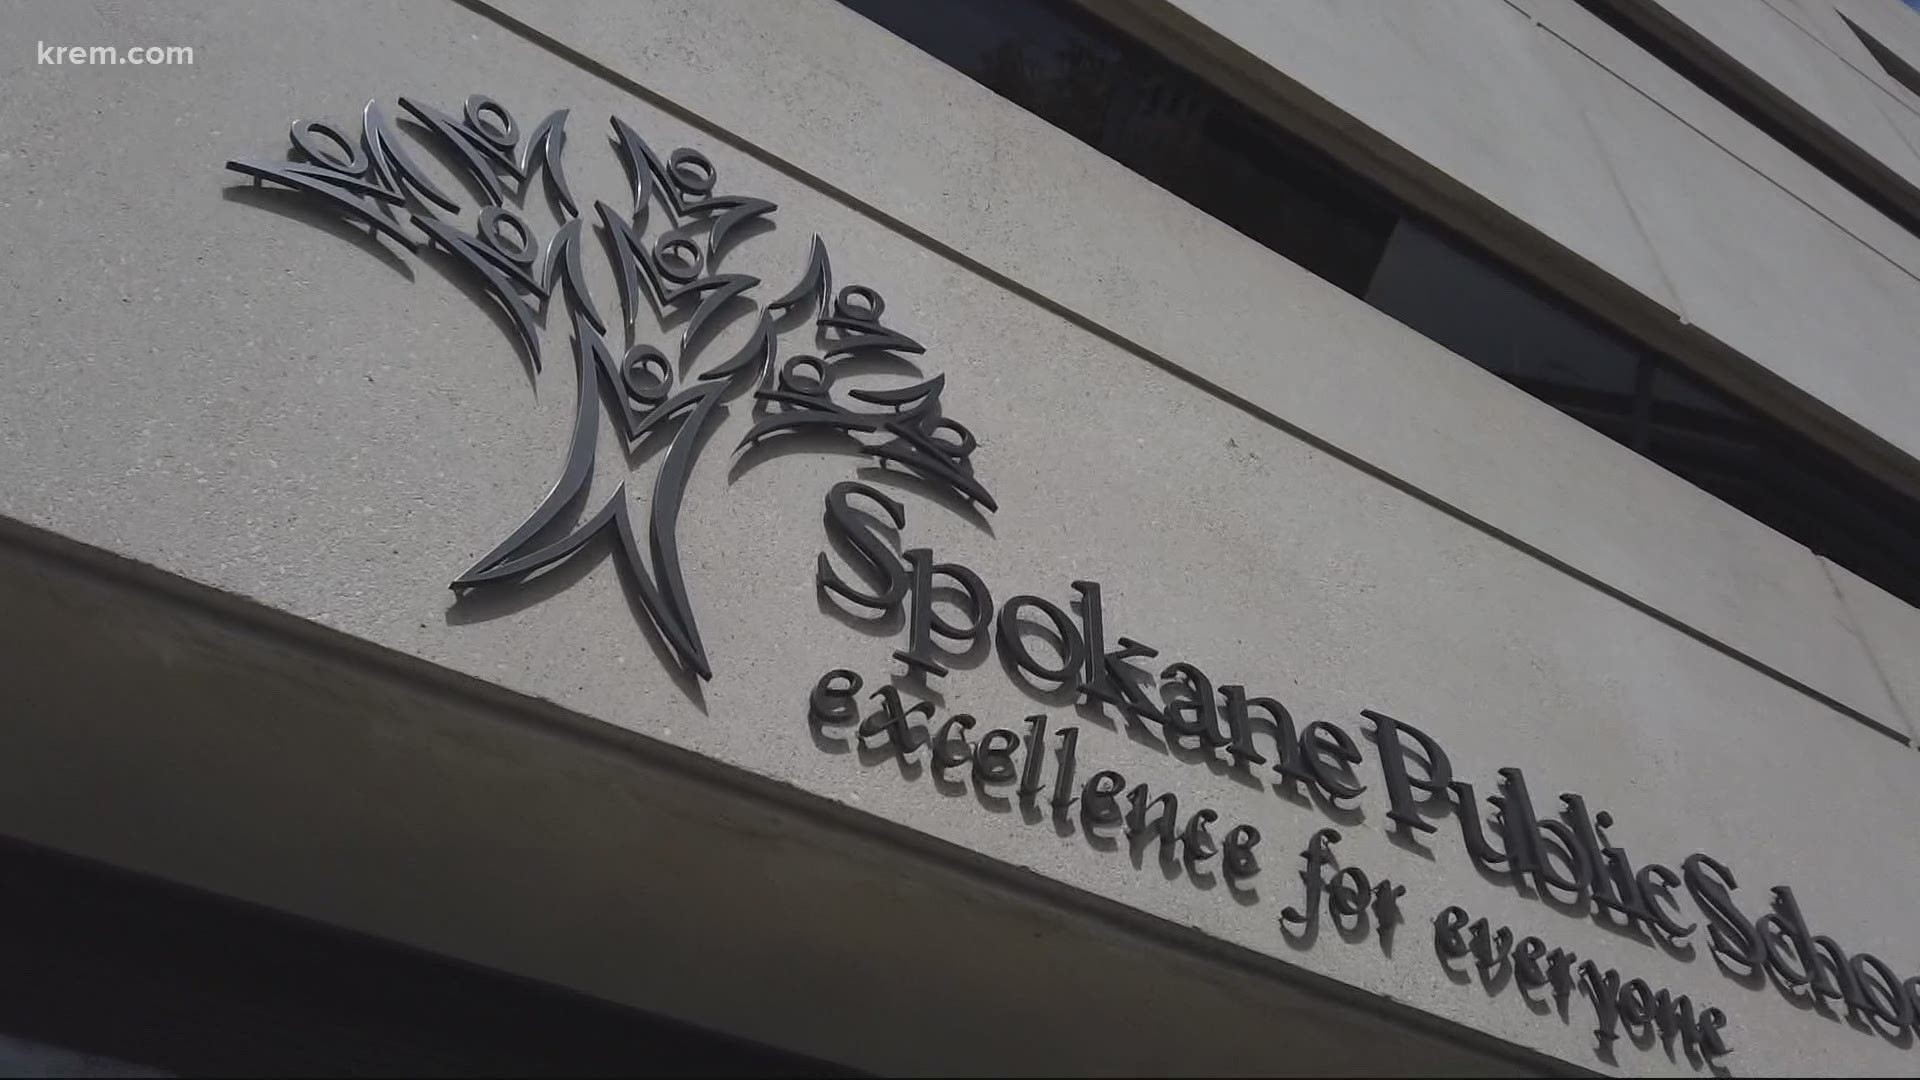 Spokane Public Schools are closed on Monday, Jan. 24 because of low staffing related to COVID-19.